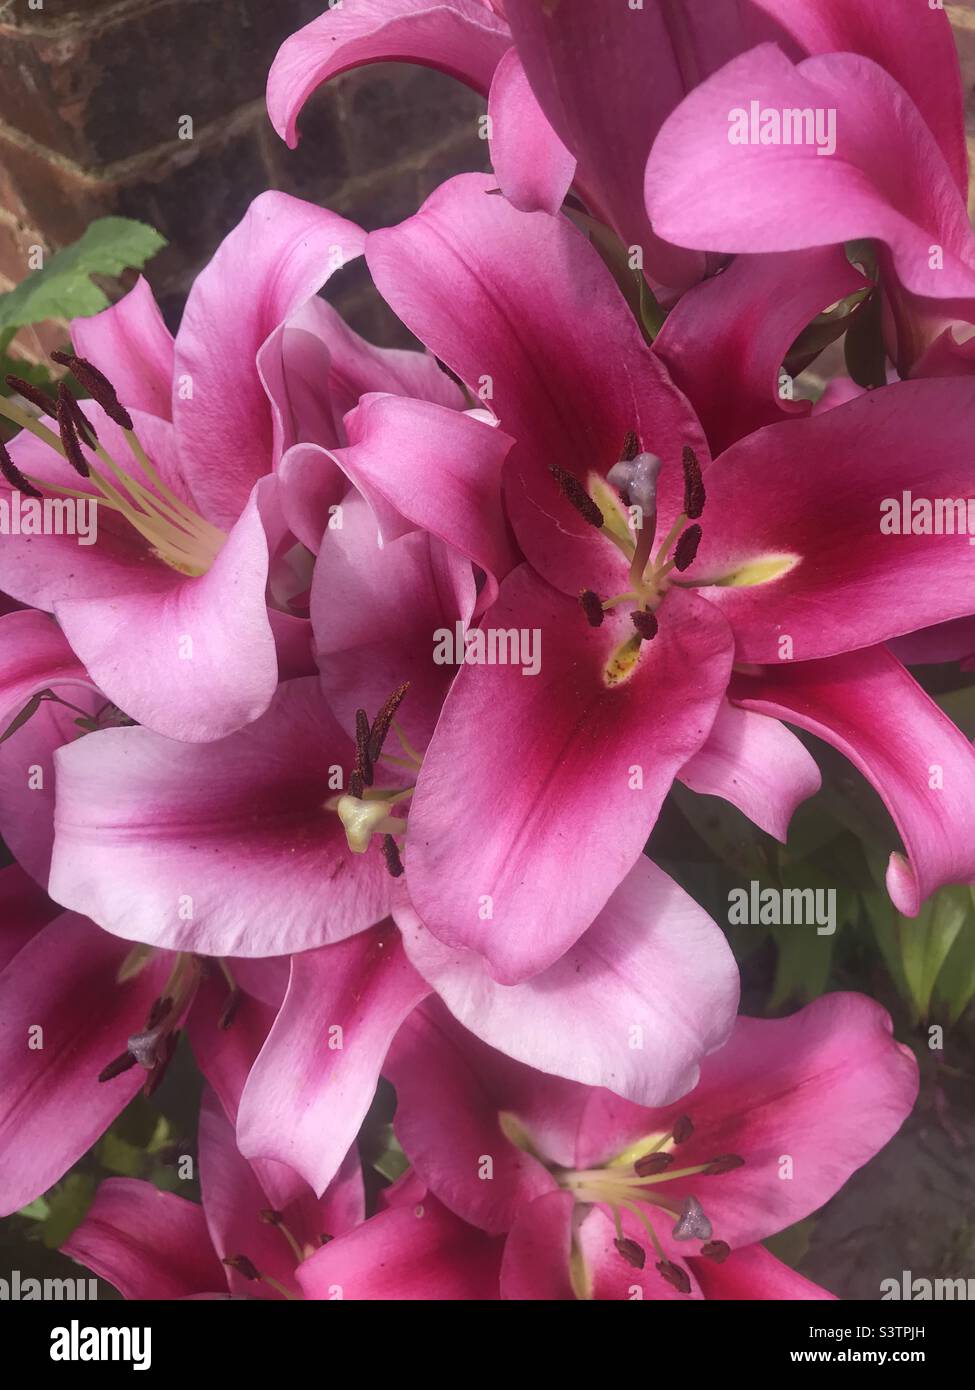 Pink Lilies outdoors in garden Stock Photo